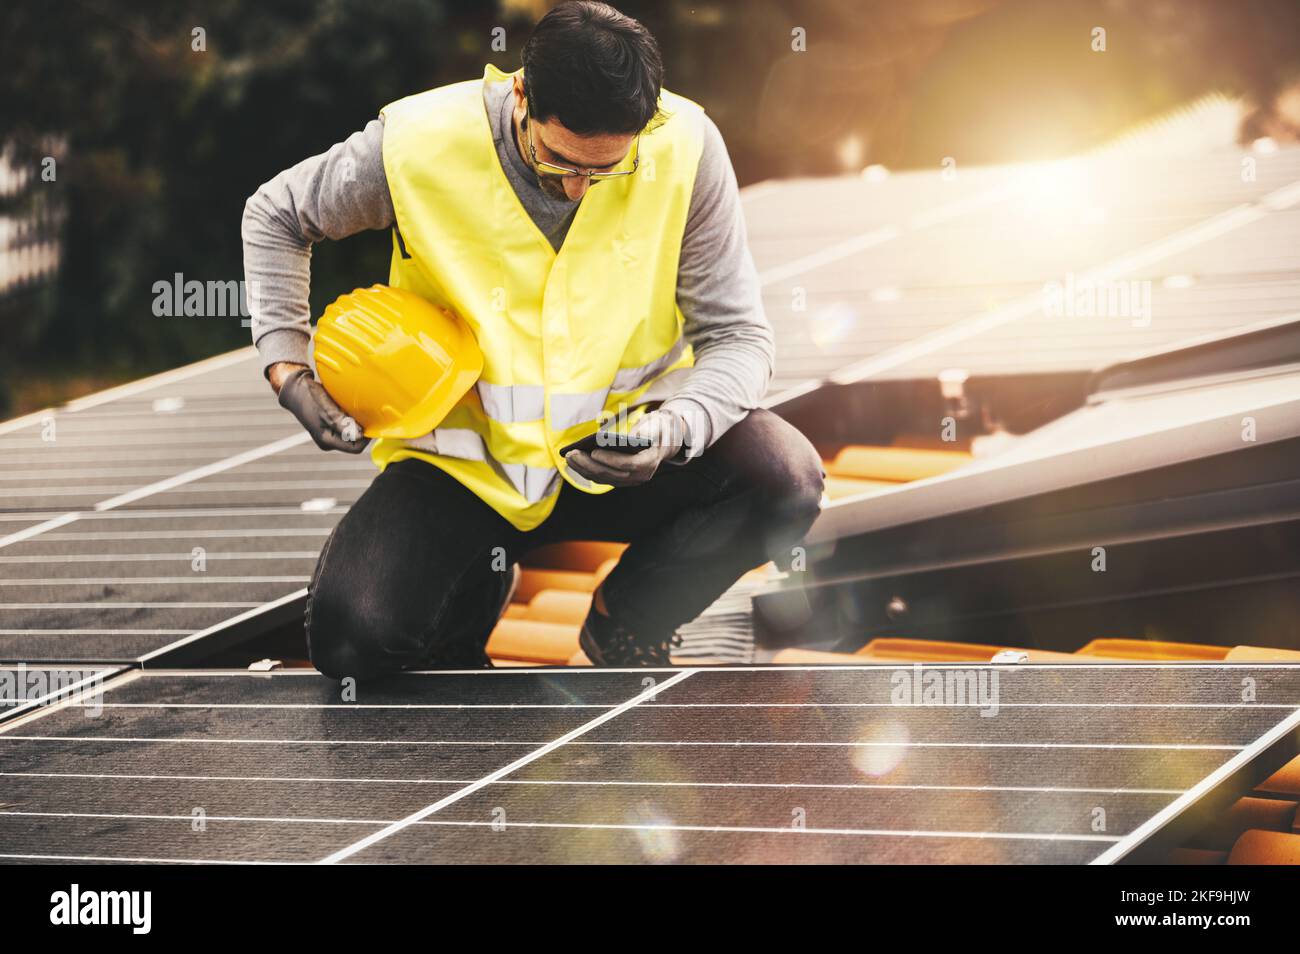 Workers verify energy system with solar panel with a phone Stock Photo